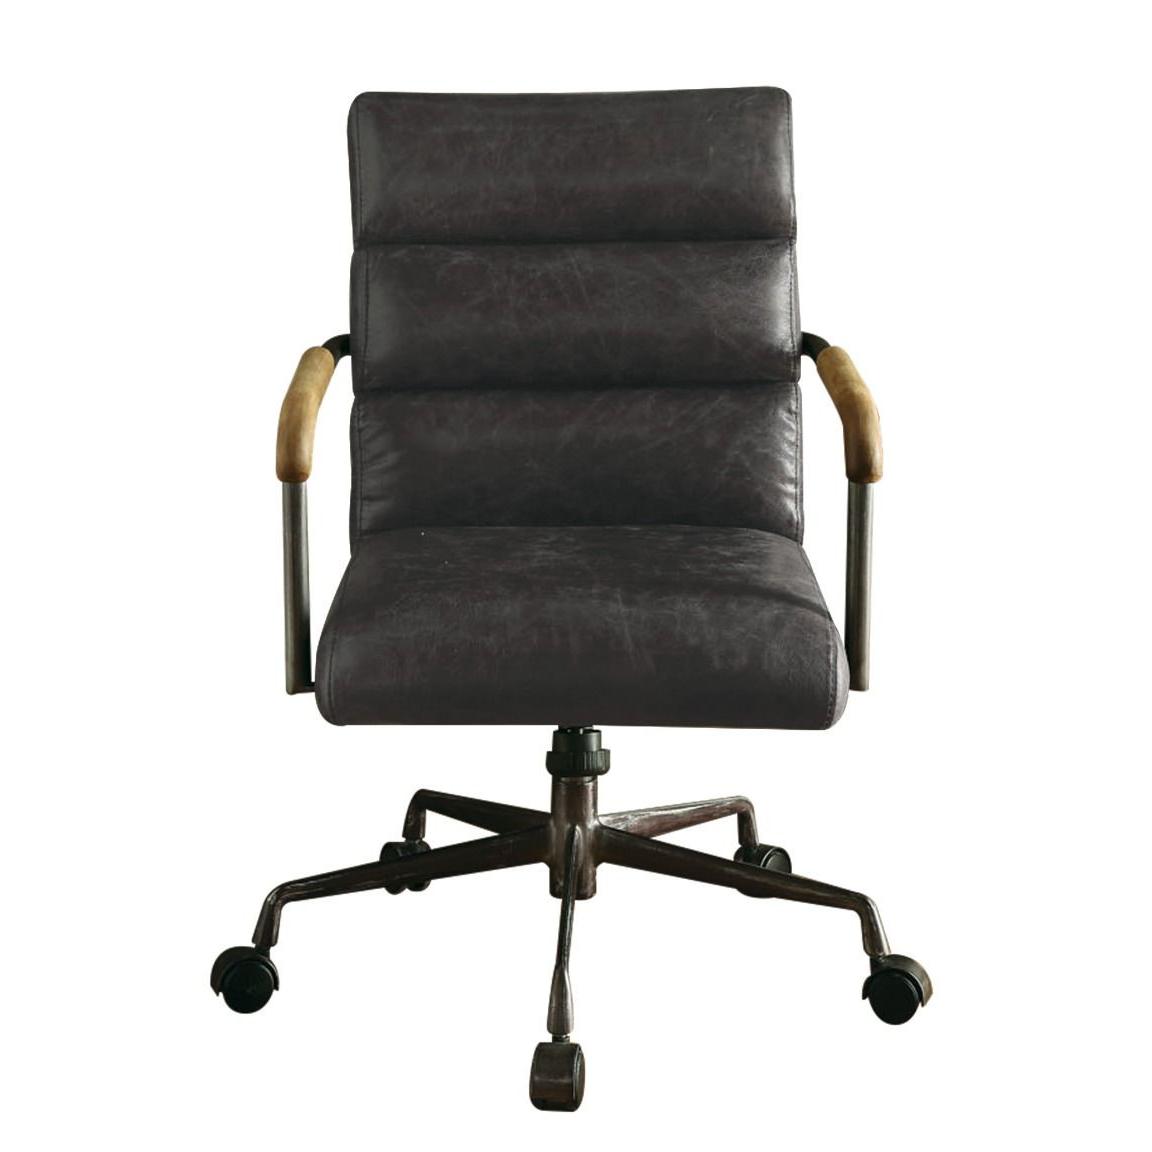 Acme Furniture Harith 92415 Executive Office Chair - Antique Slate